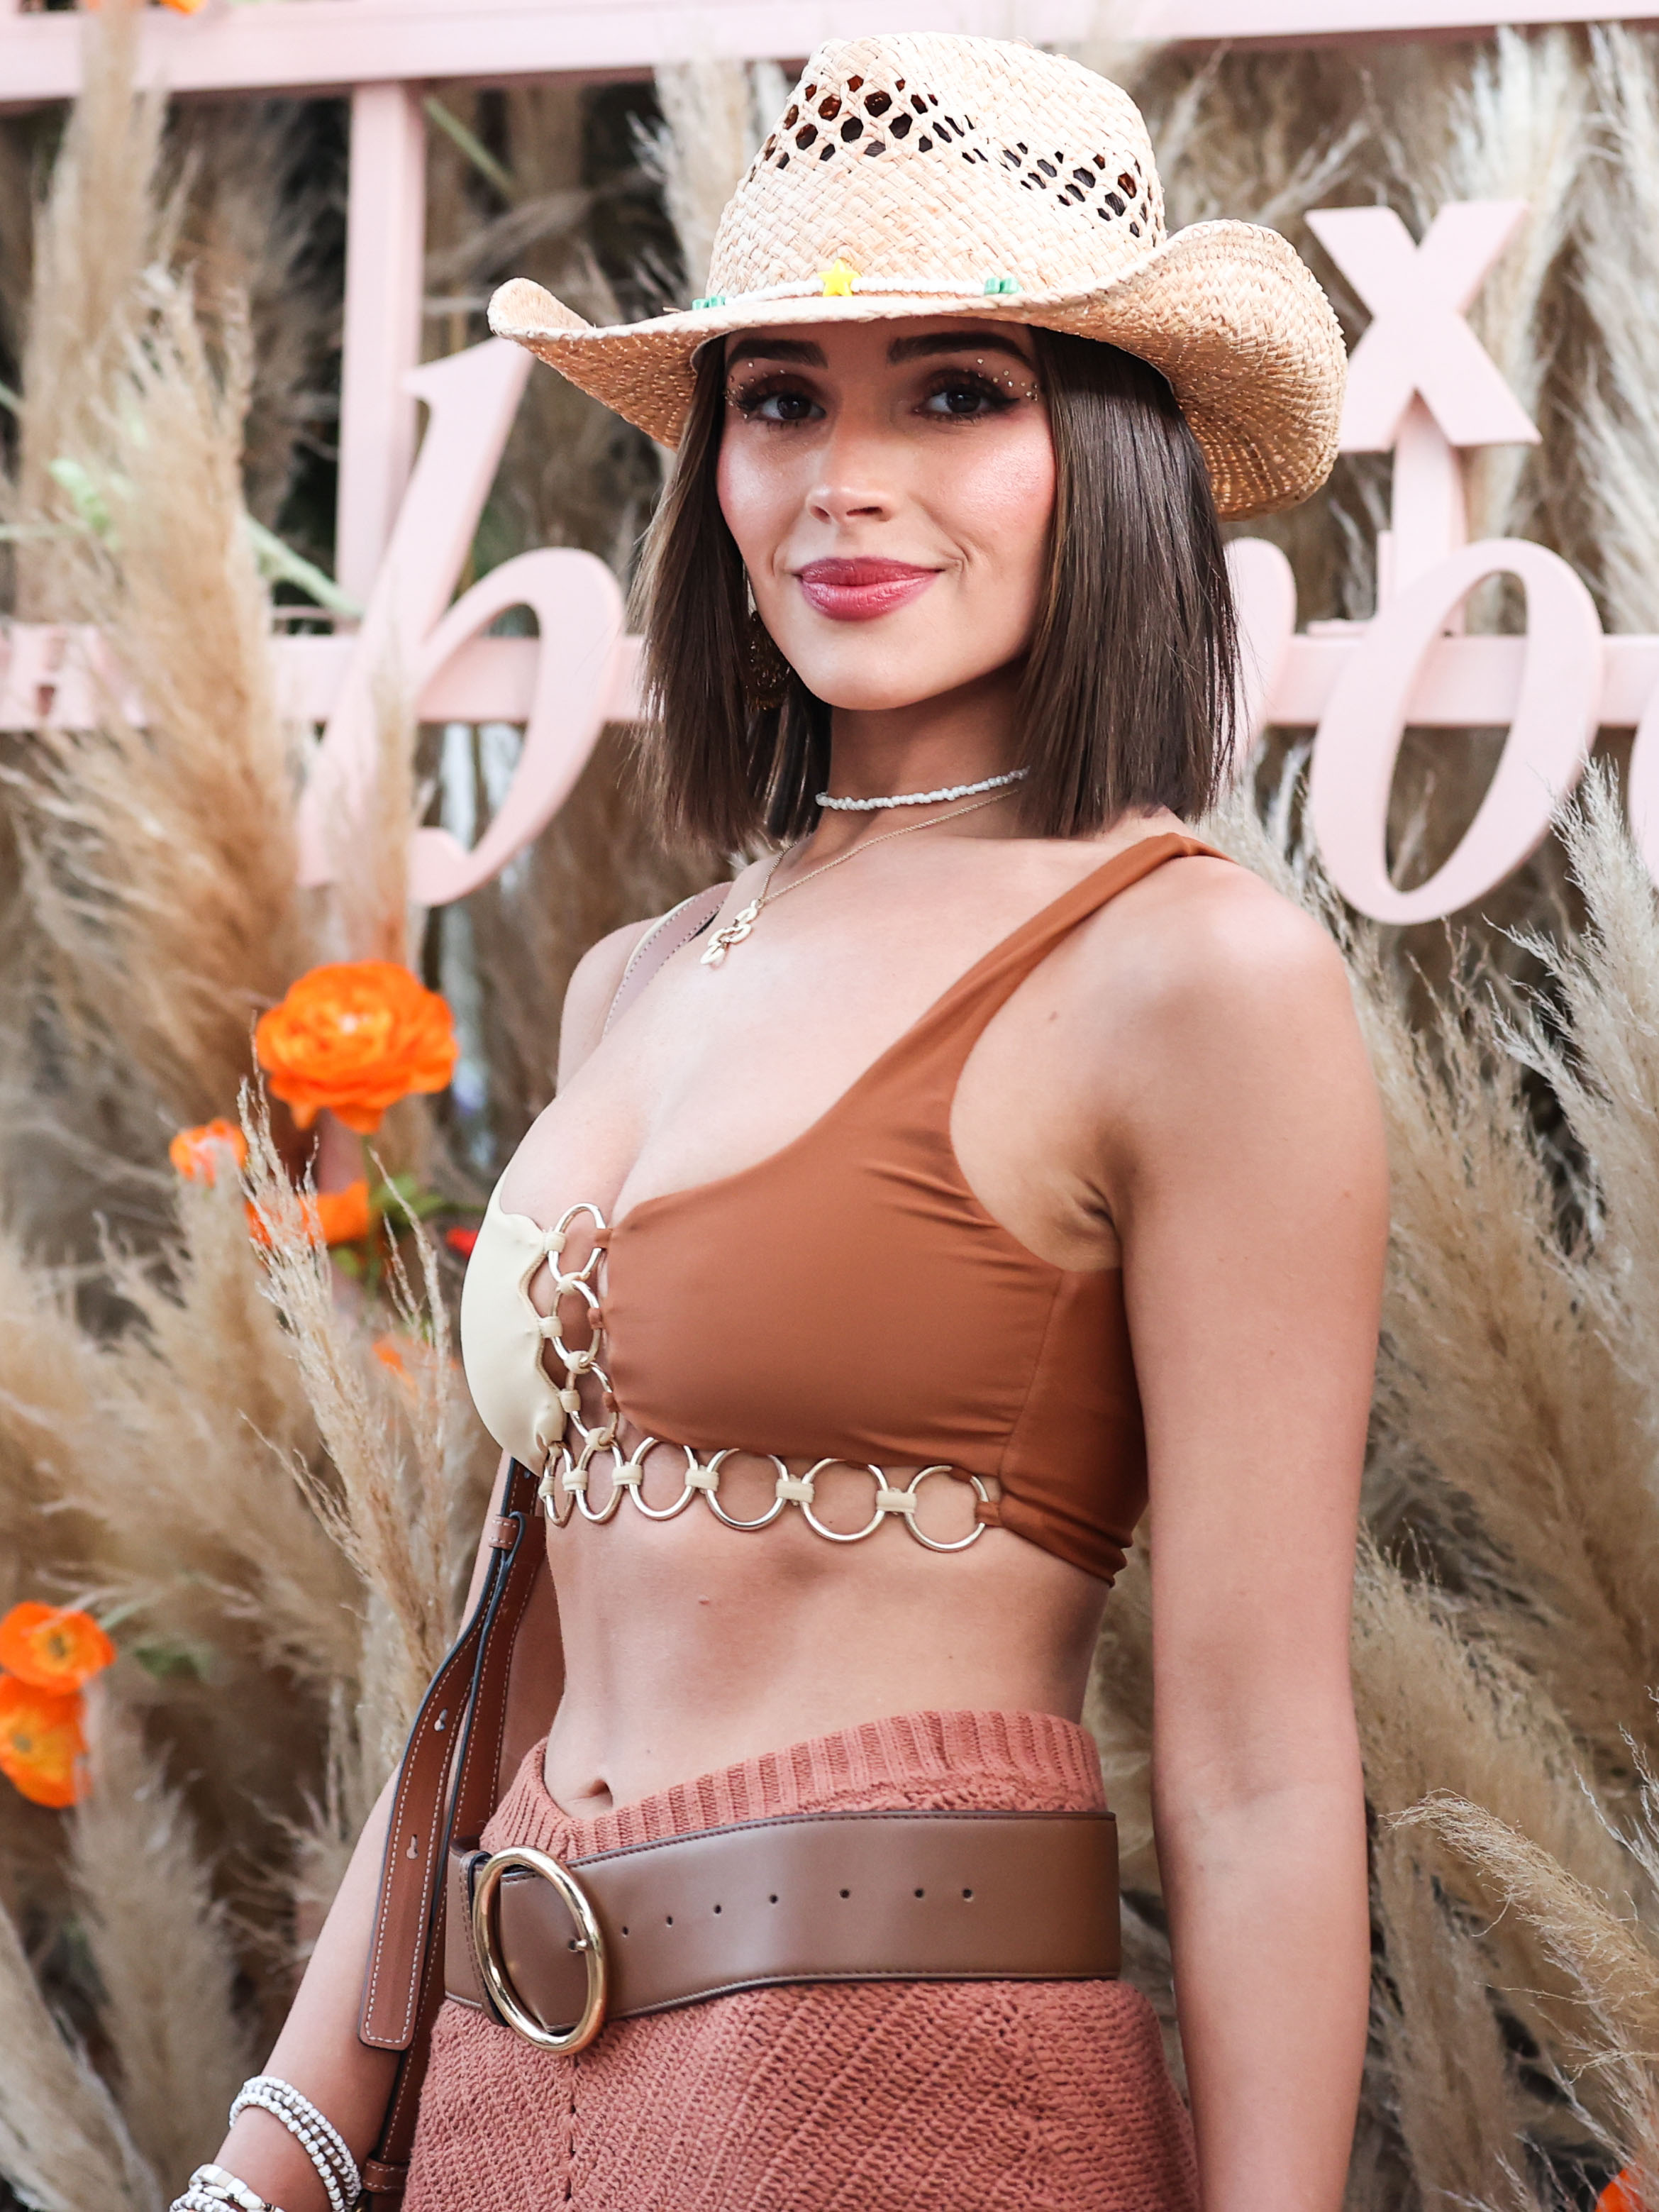 Every Celebrity Coachella Outfit You Must See (For Better or Worse)